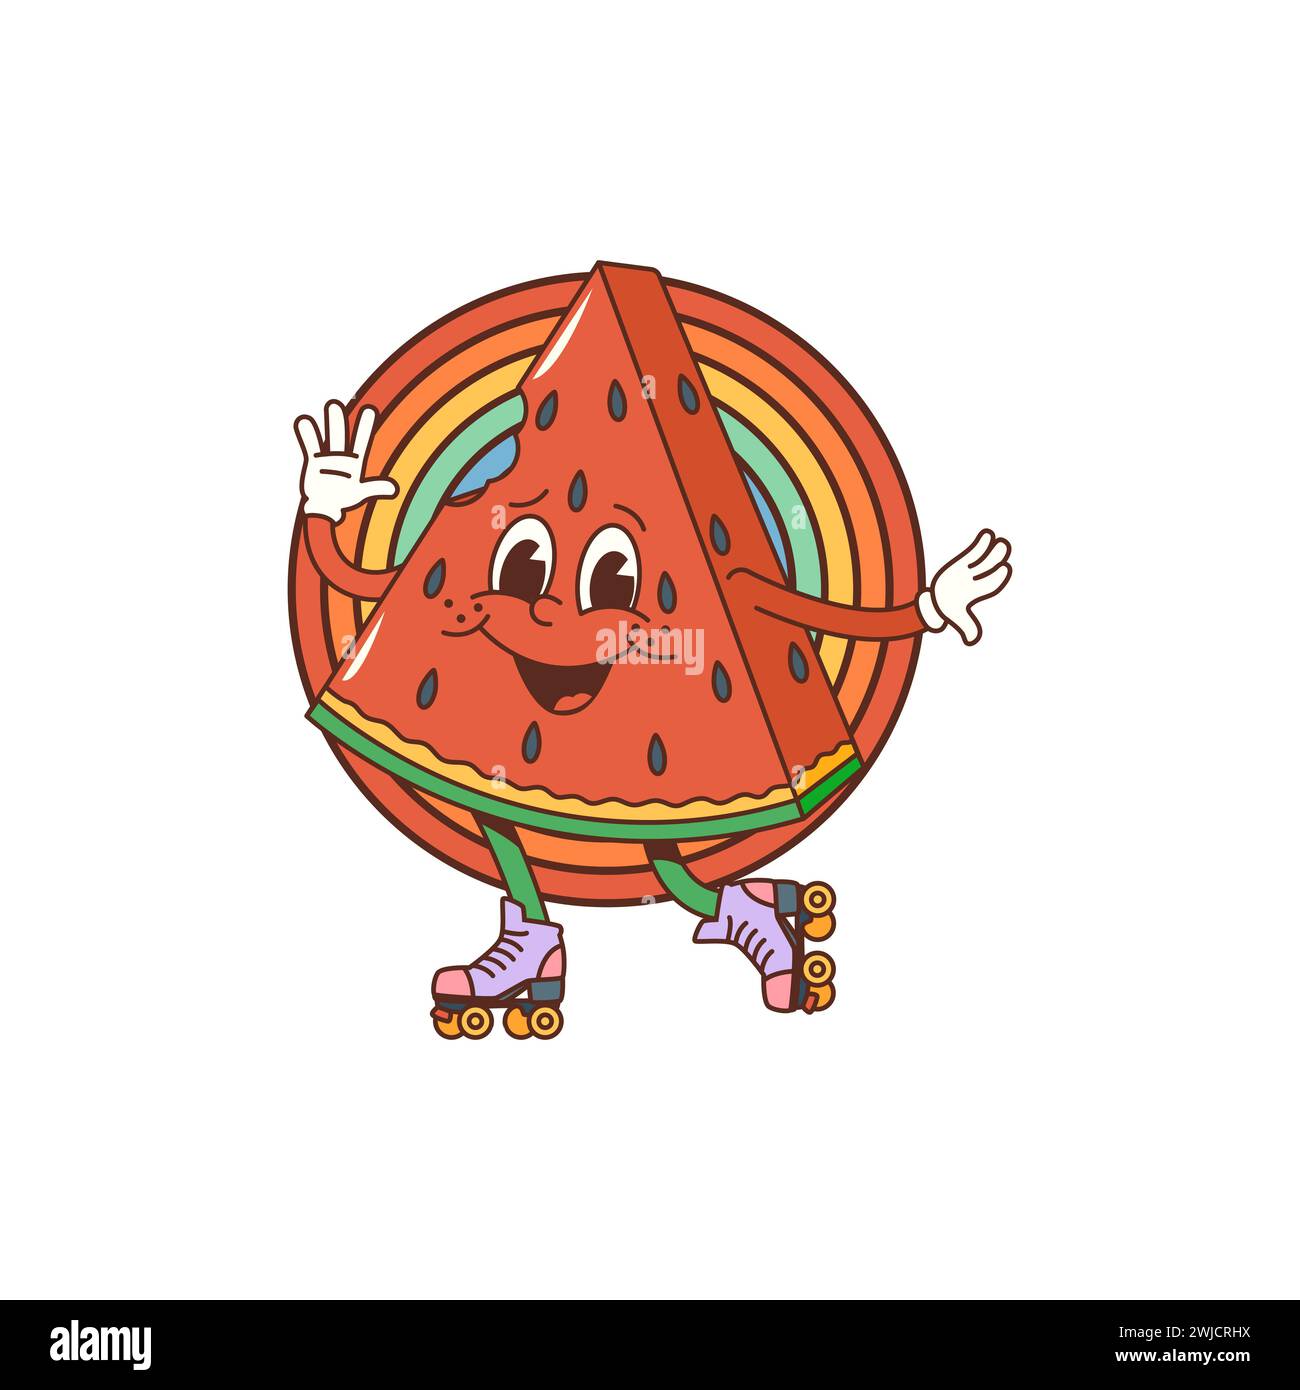 Cartoon groovy watermelon character. Isolated vector fruit slice with laid-back attitude, sporting vibrant colors and a perpetual smile, dance and spread joy and chill vibes in funny psychedelic world Stock Vector